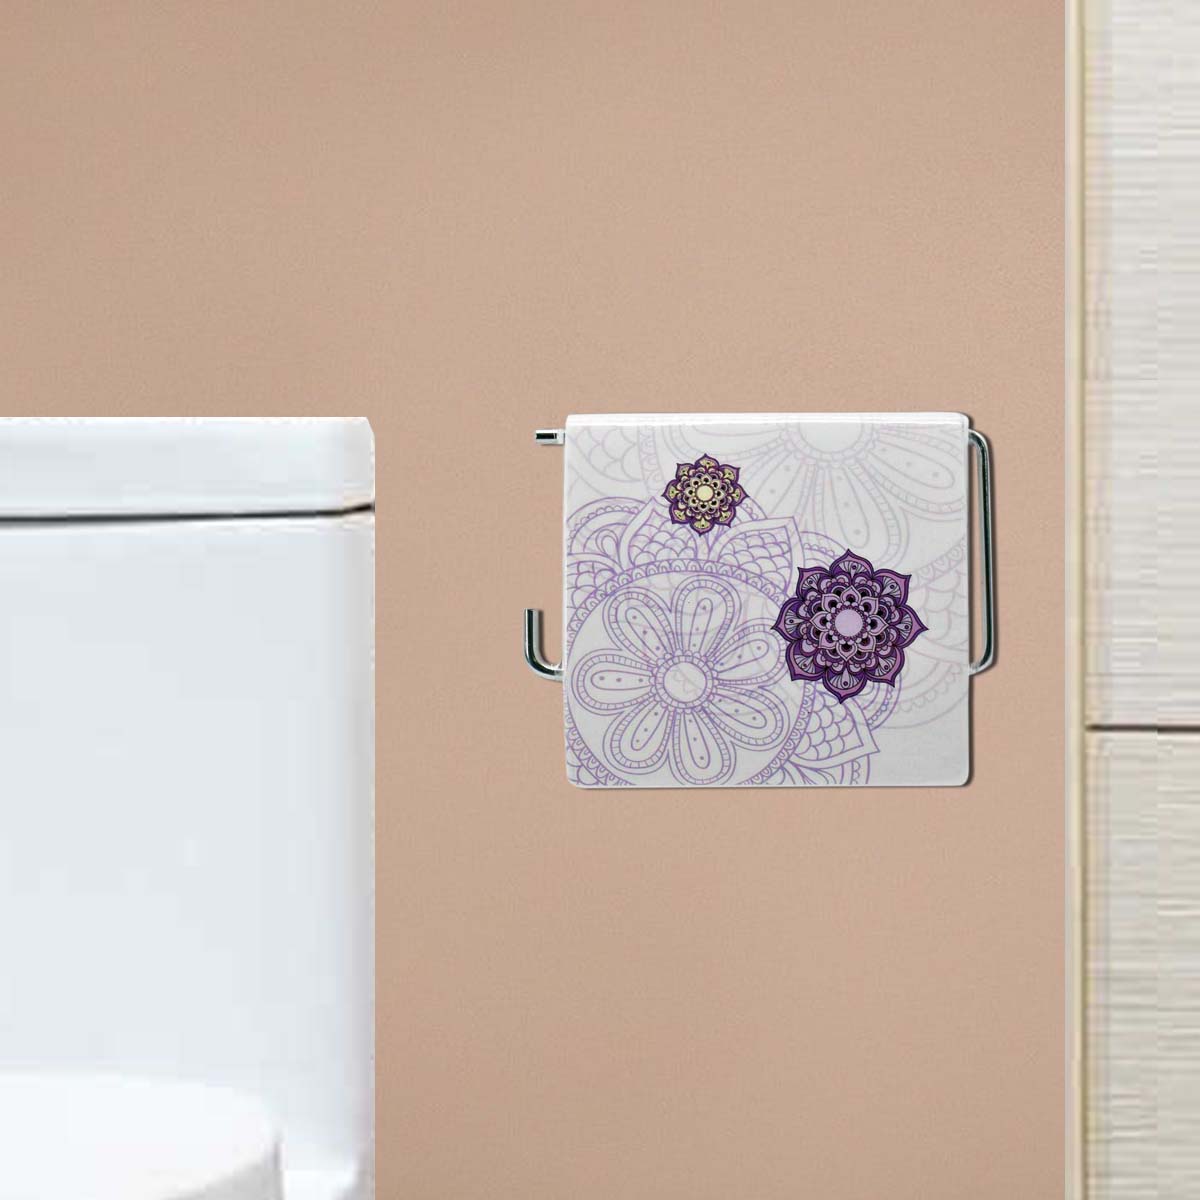 Kookee Wall Mounted Acrylic Tissue Paper, Toilet Roll Holder for Home, Kitchen, Cabinet and Bathroom (JS160808)